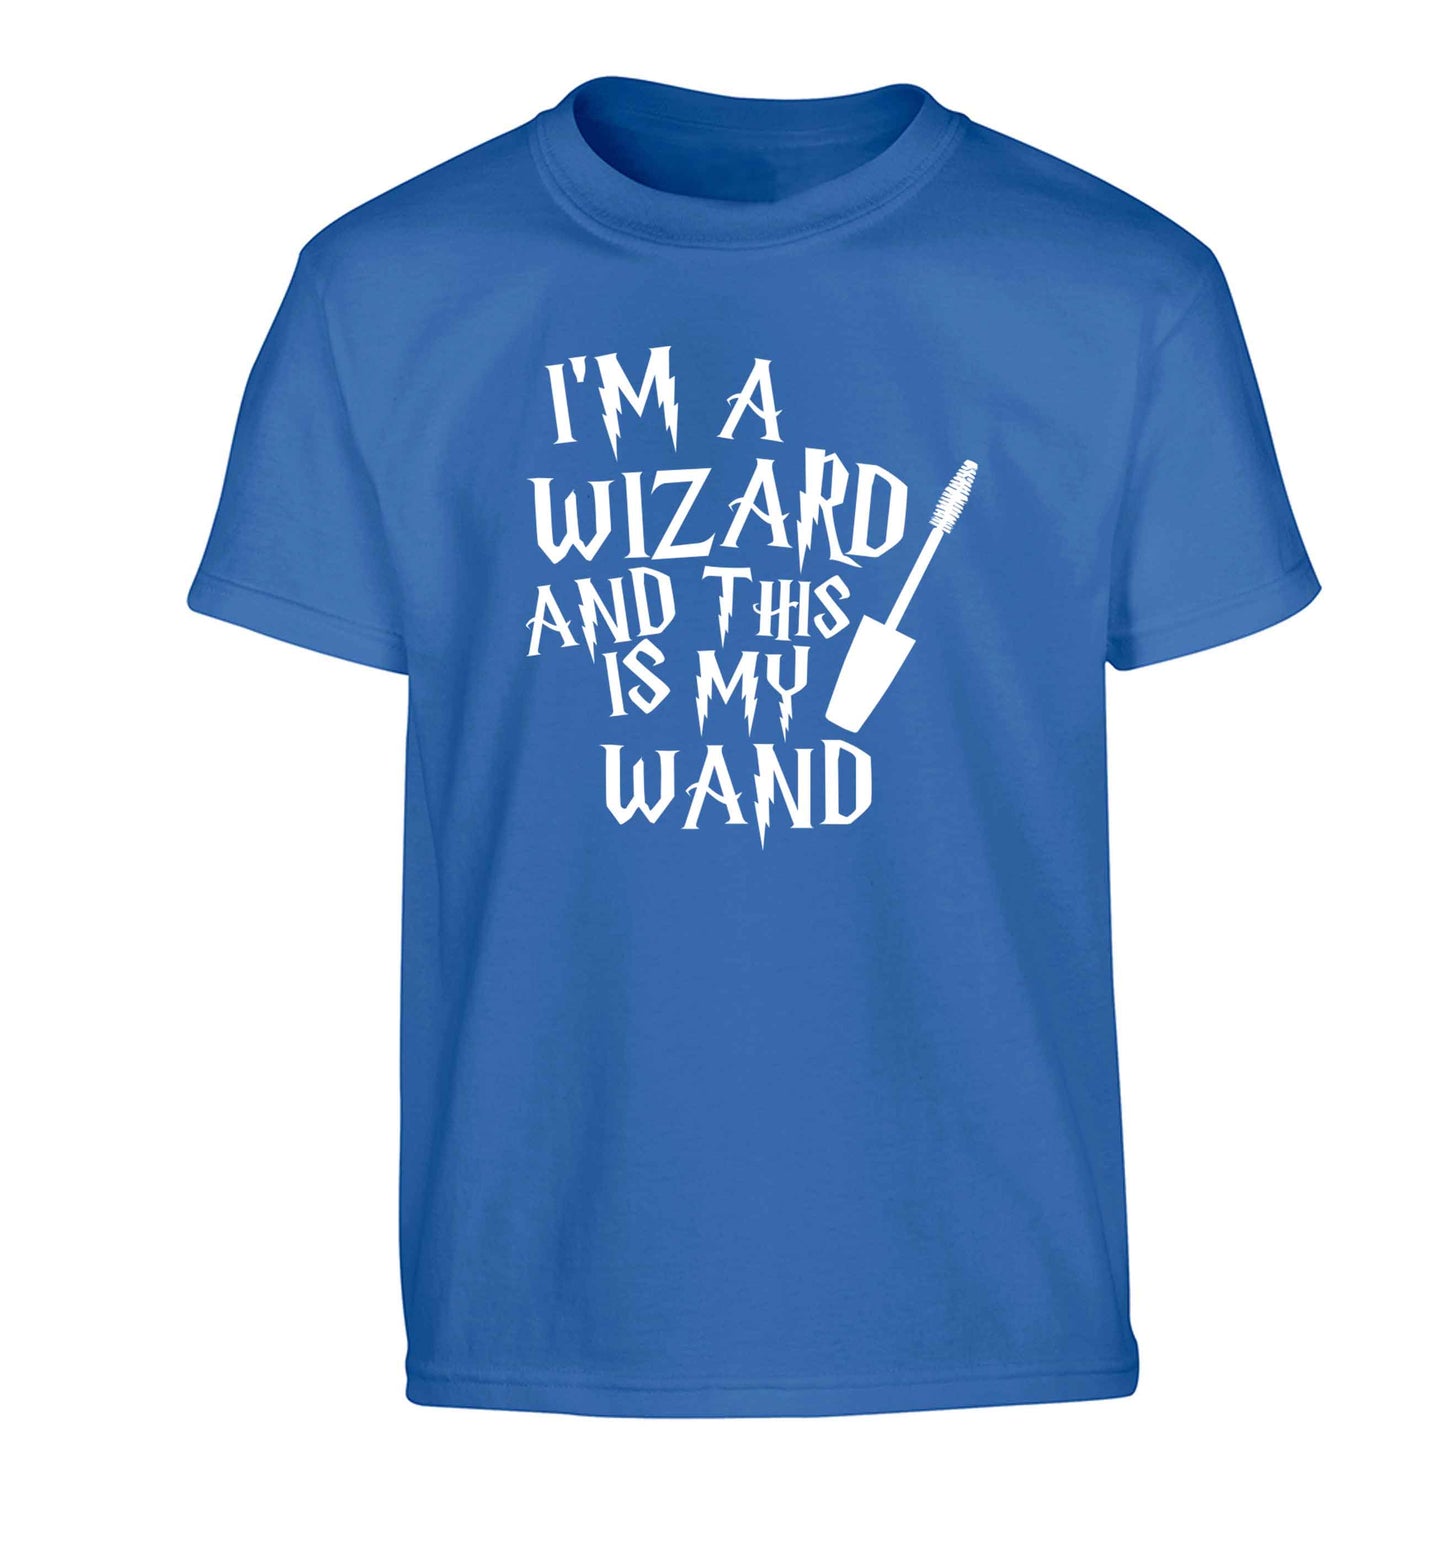 I'm a wizard and this is my wand Children's blue Tshirt 12-13 Years